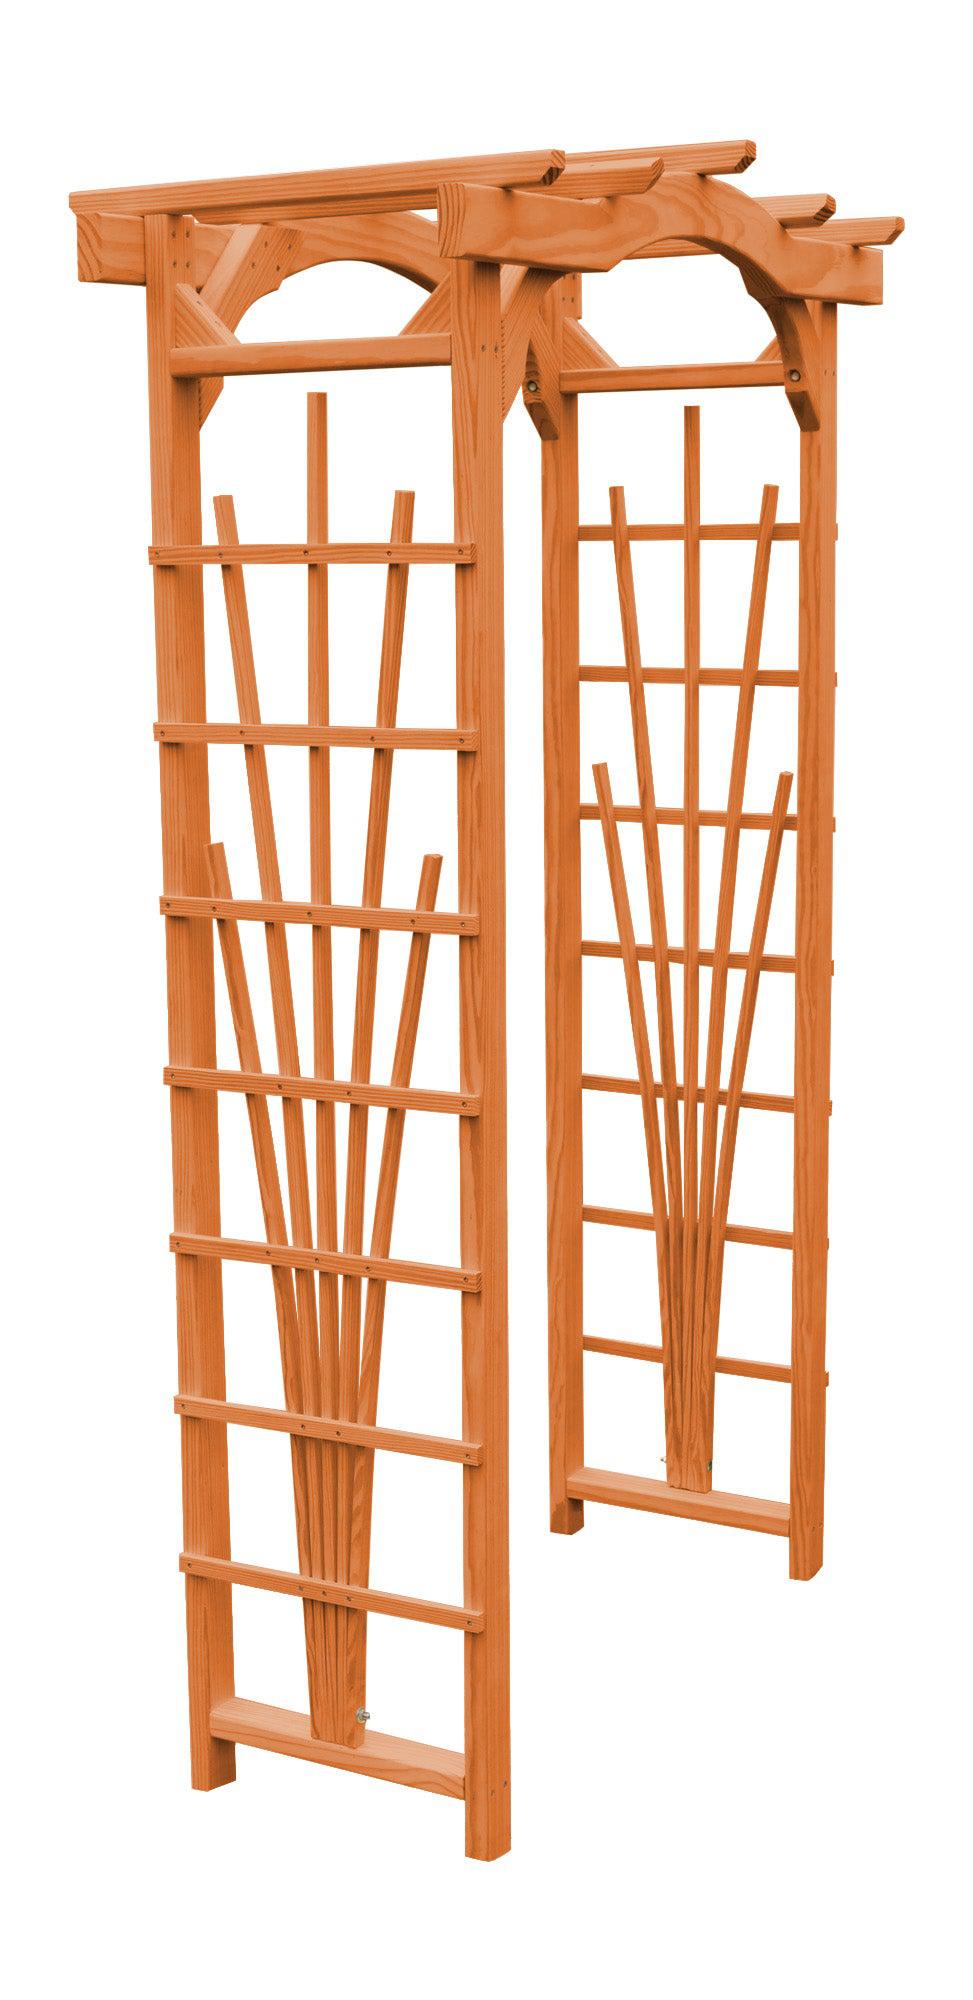 A&L FURNITURE CO. 3' Cranbrook Pressure Treated Pine Arbor (THIS ITEM HAS BEEN DISCONTINUED)